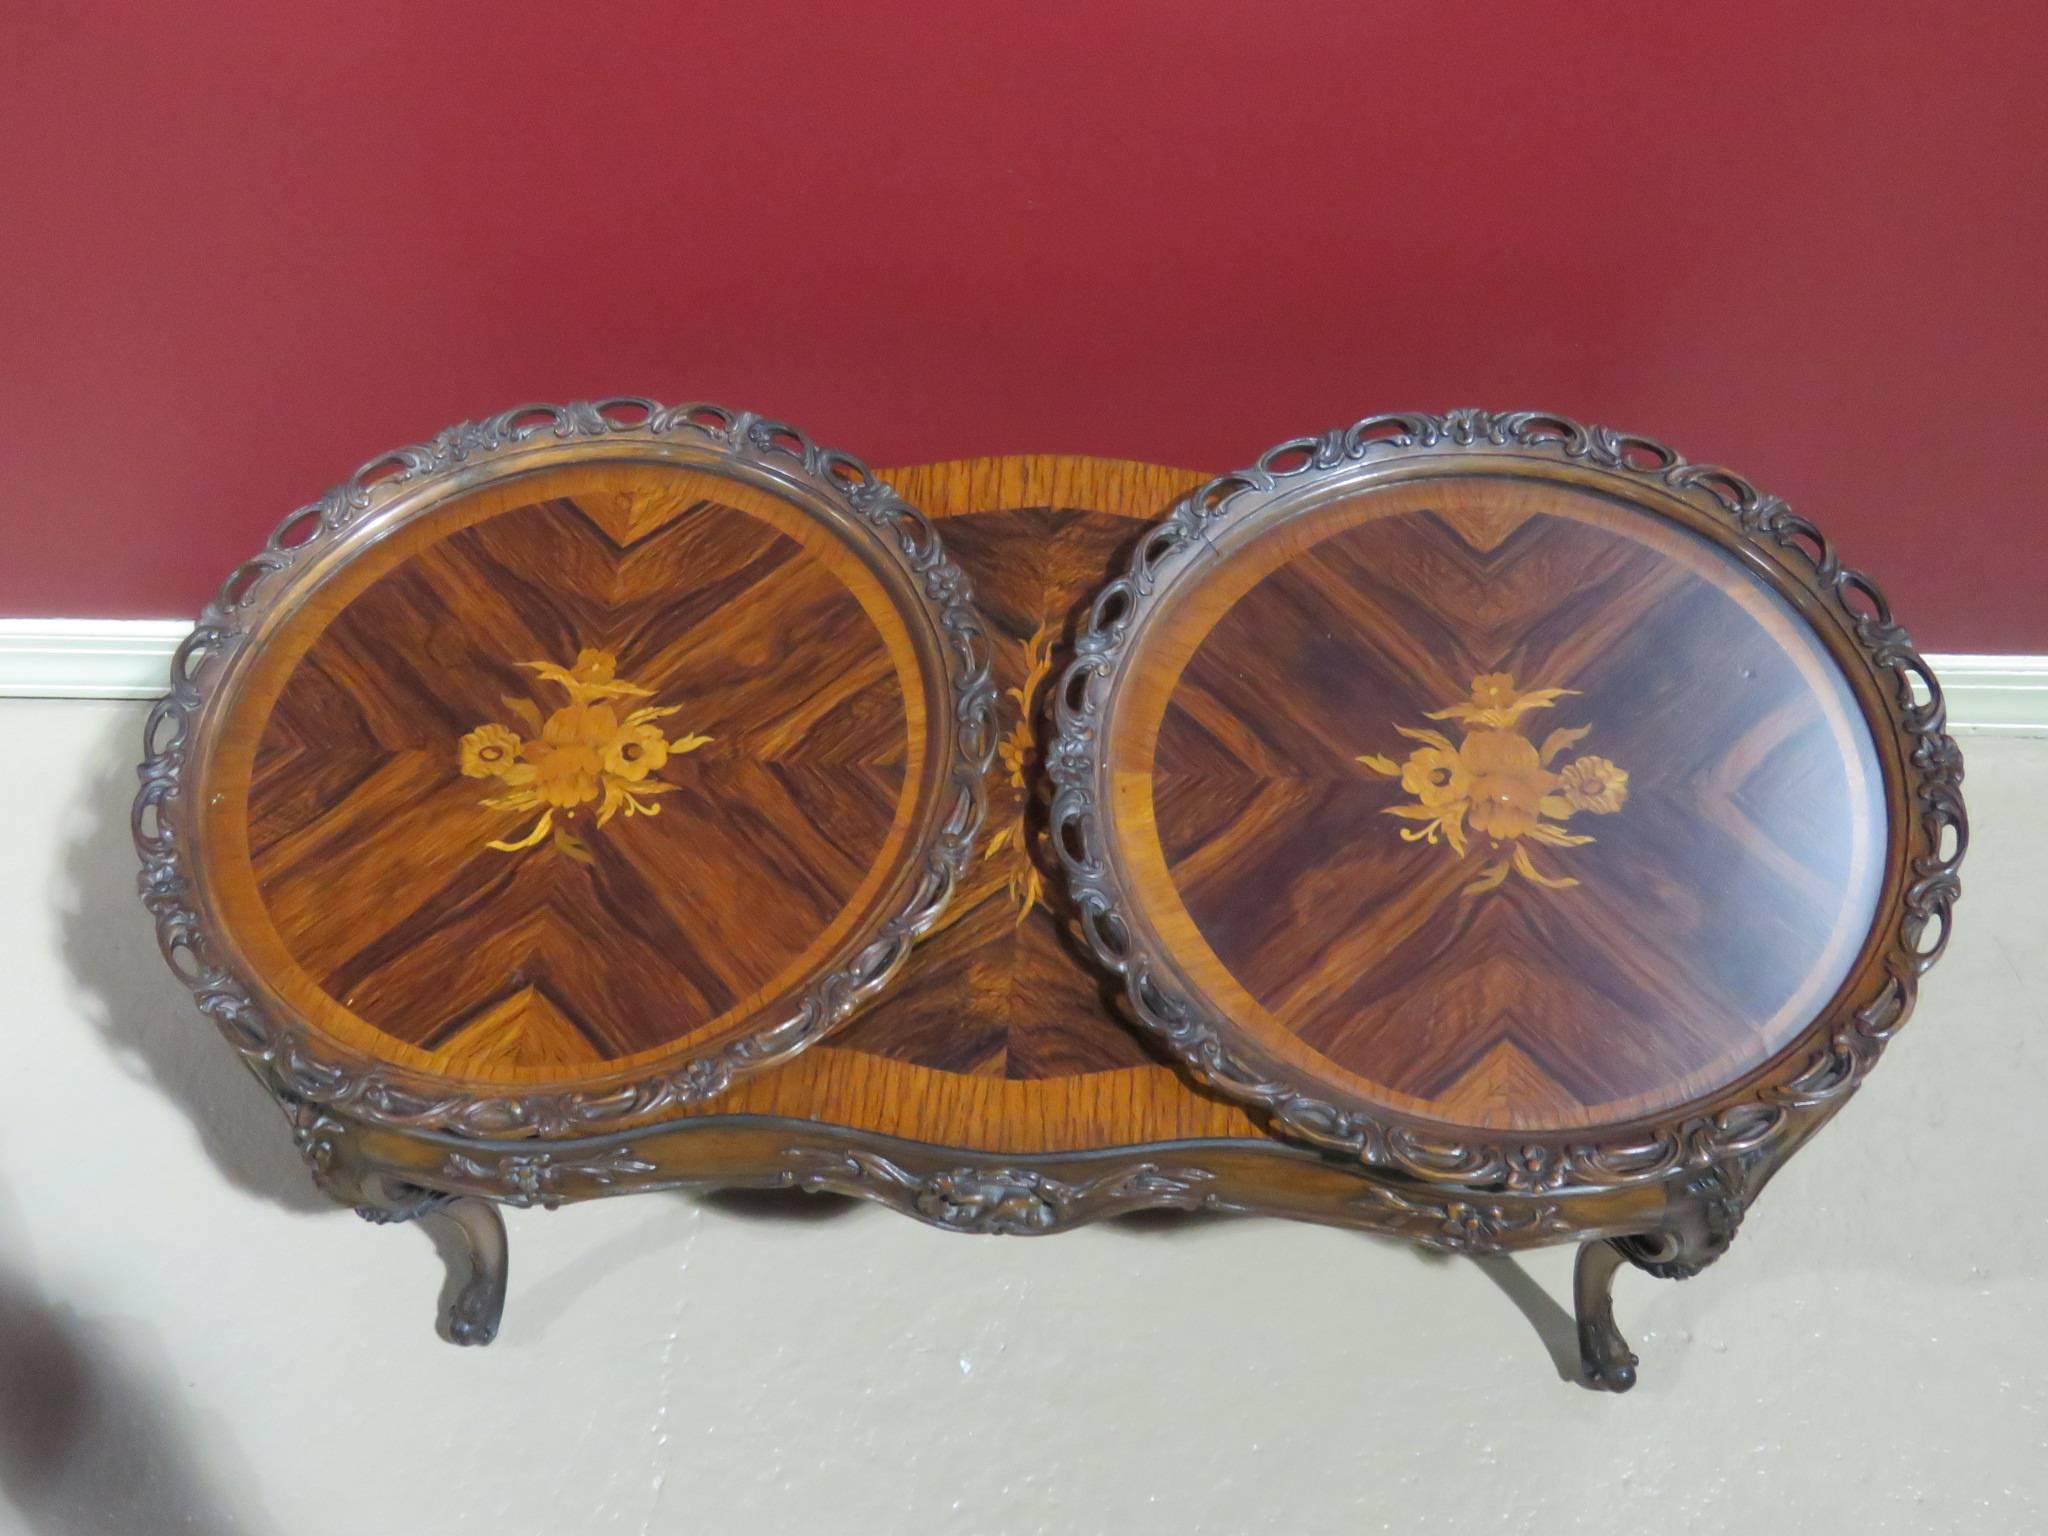 Parquetry inlaid with floral inlay decoration. Tray tops.